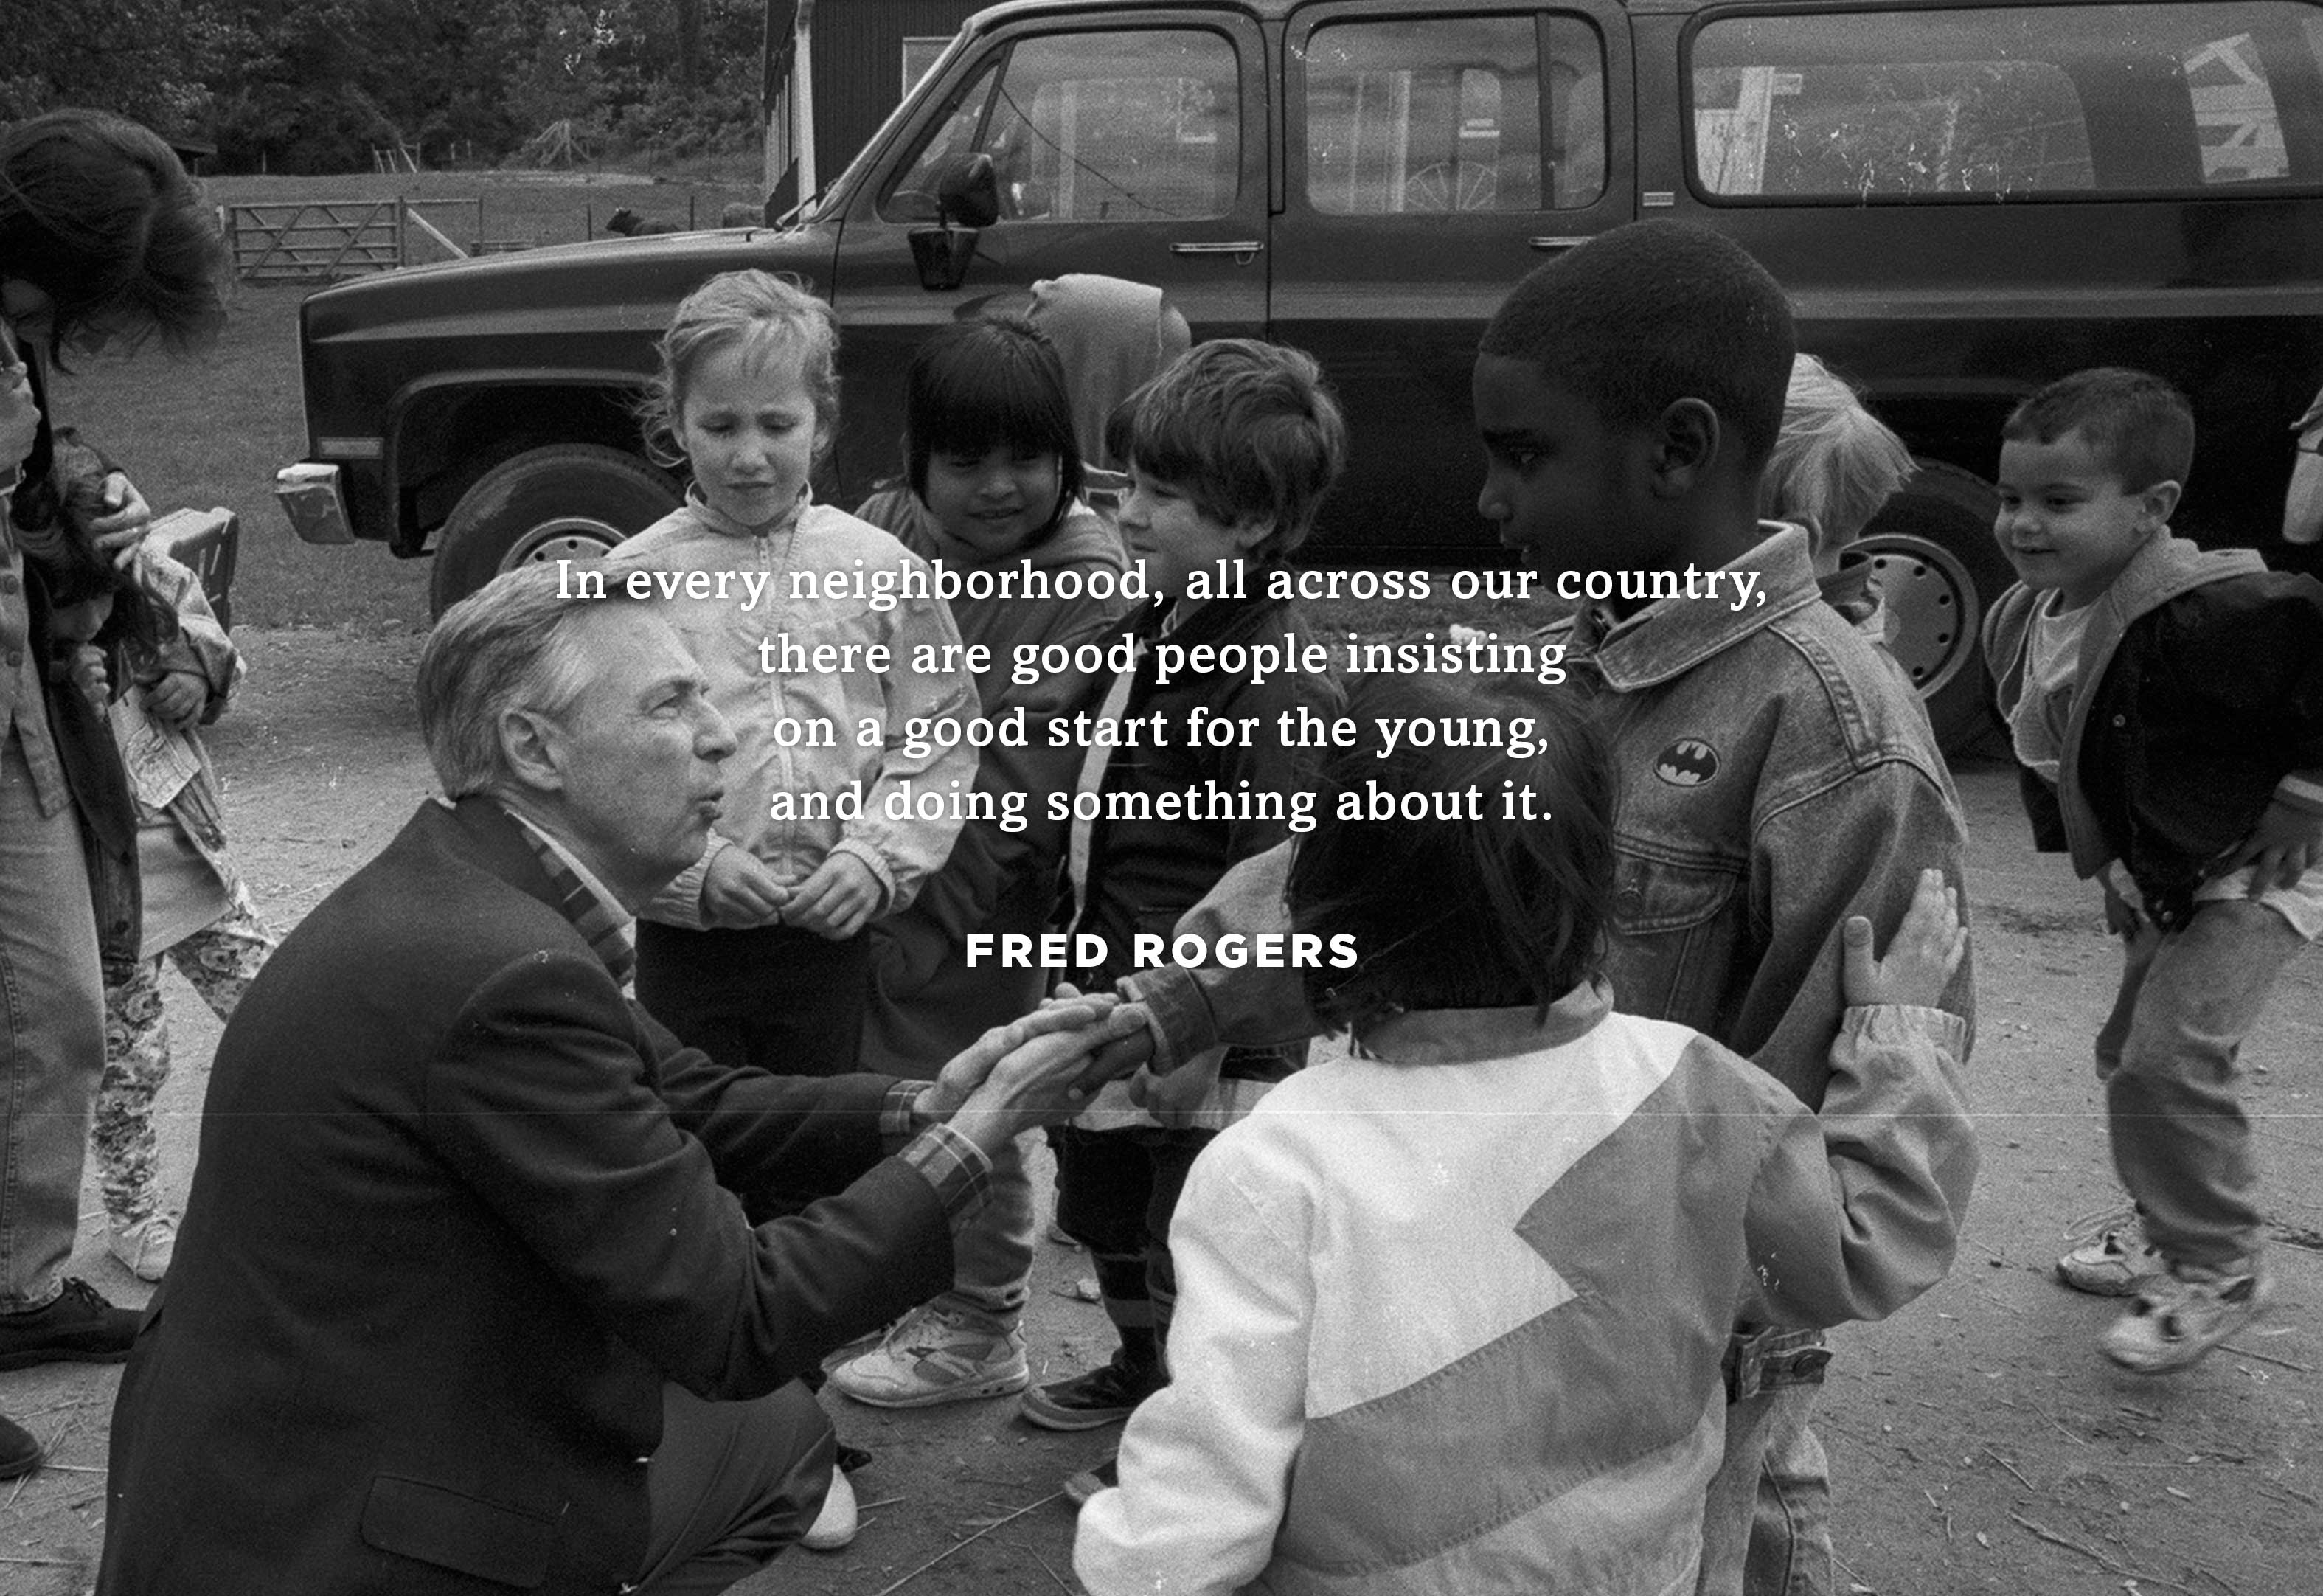 Fred Rogers speaking to a group a children. Photo by Lynn Johnson.